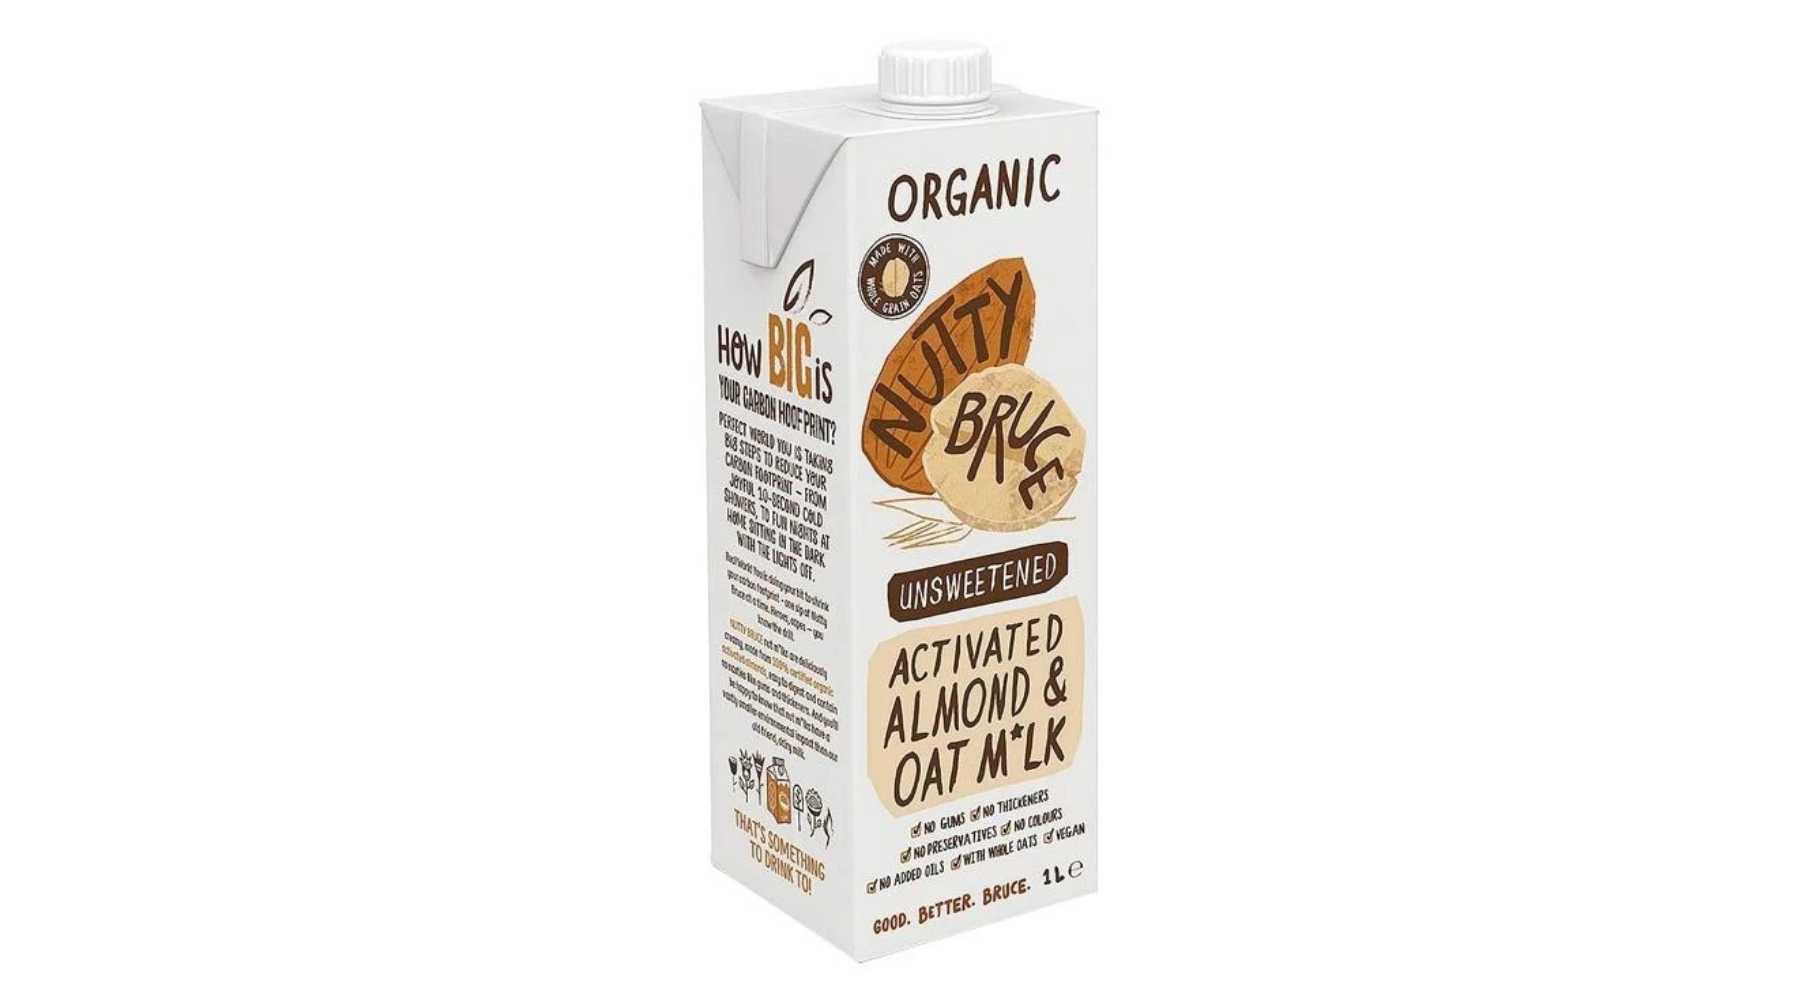 Nutty Bruce - Organic Activated Unsweetened Almond & Oat M*lk